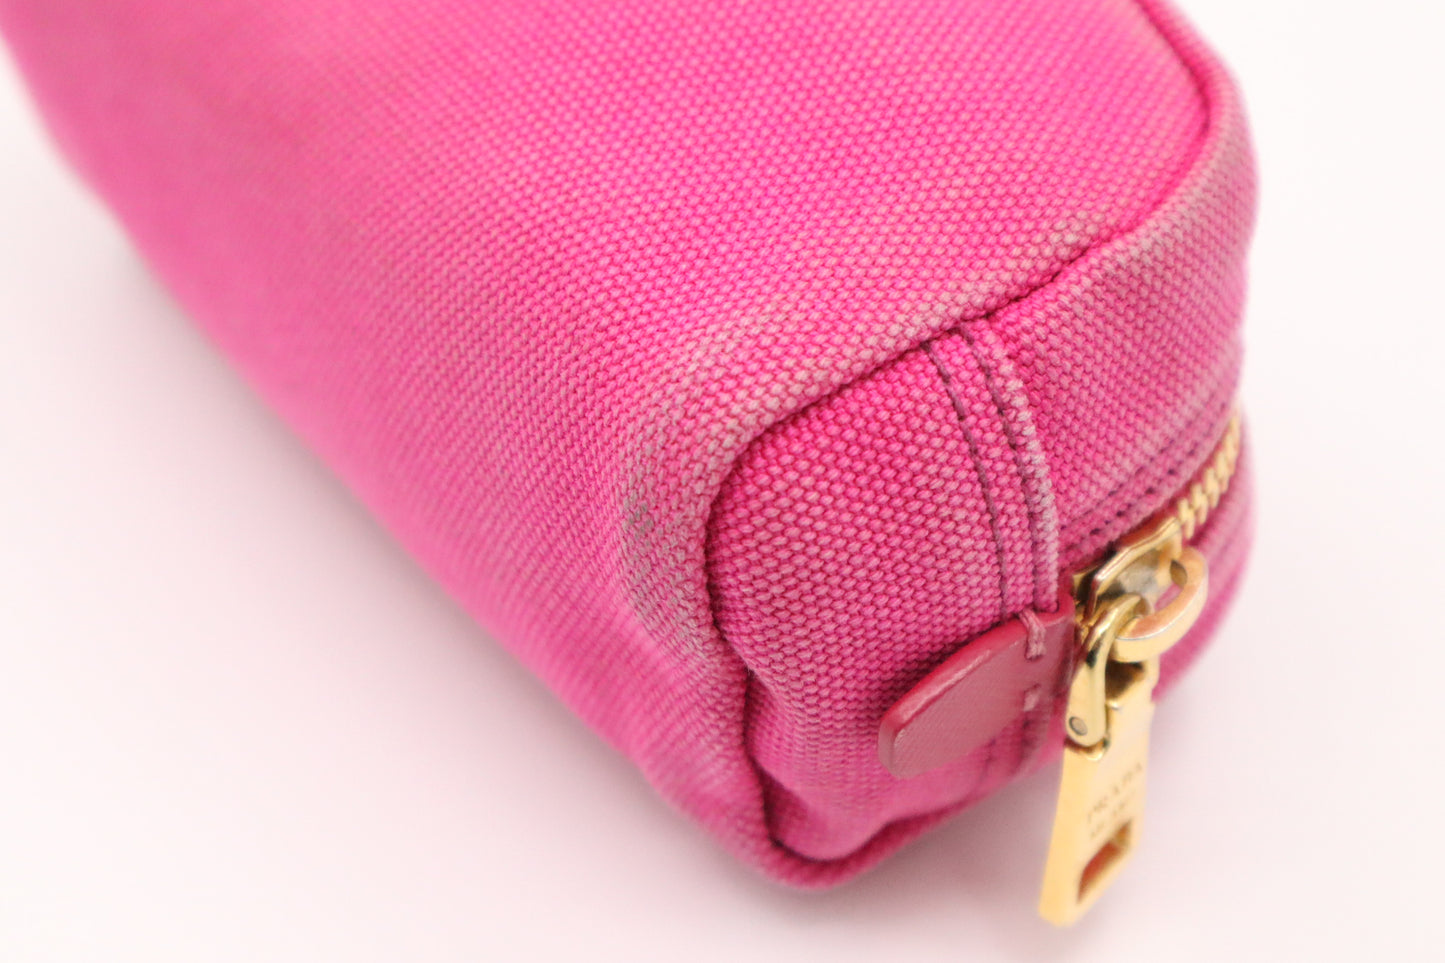 Prada Cosmetics Pouch in Pink Canvas